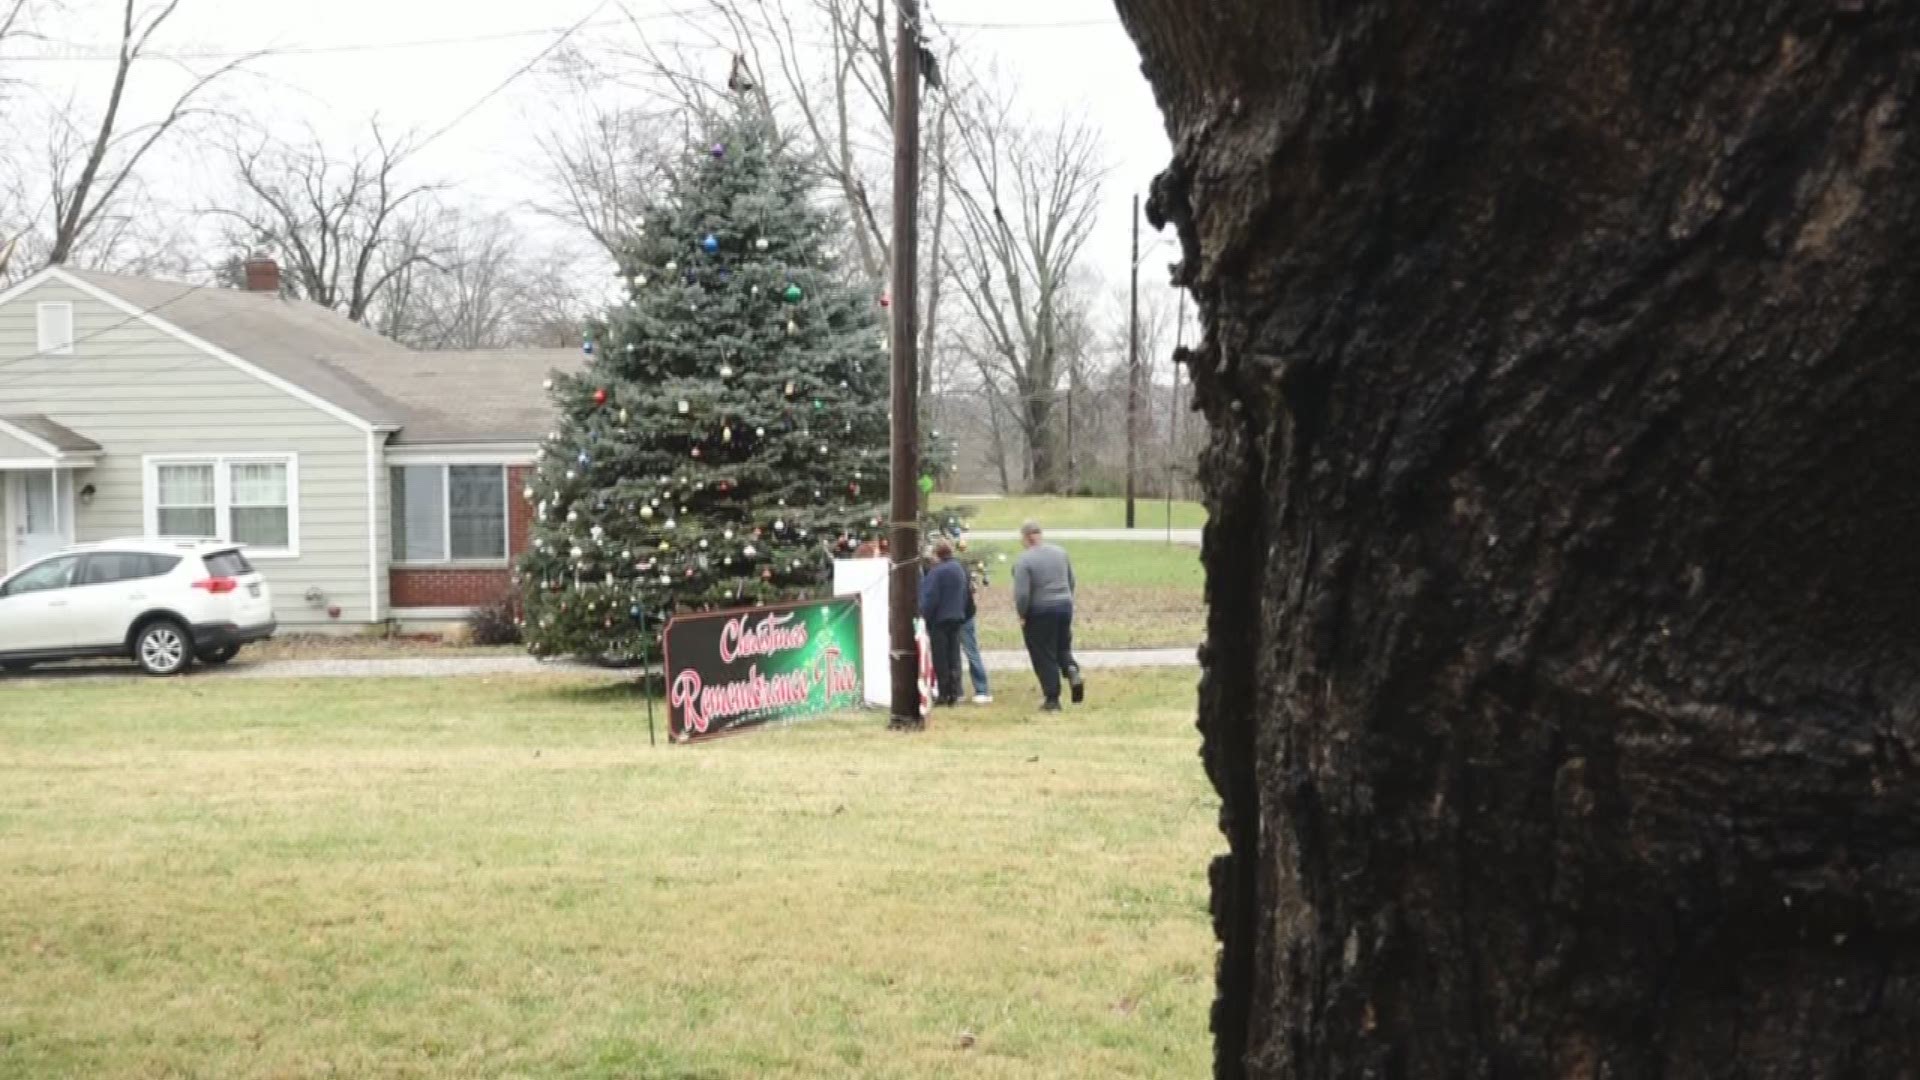 An Indiana woman decided to turn a tree on her property into something really special for those who have lost loved ones